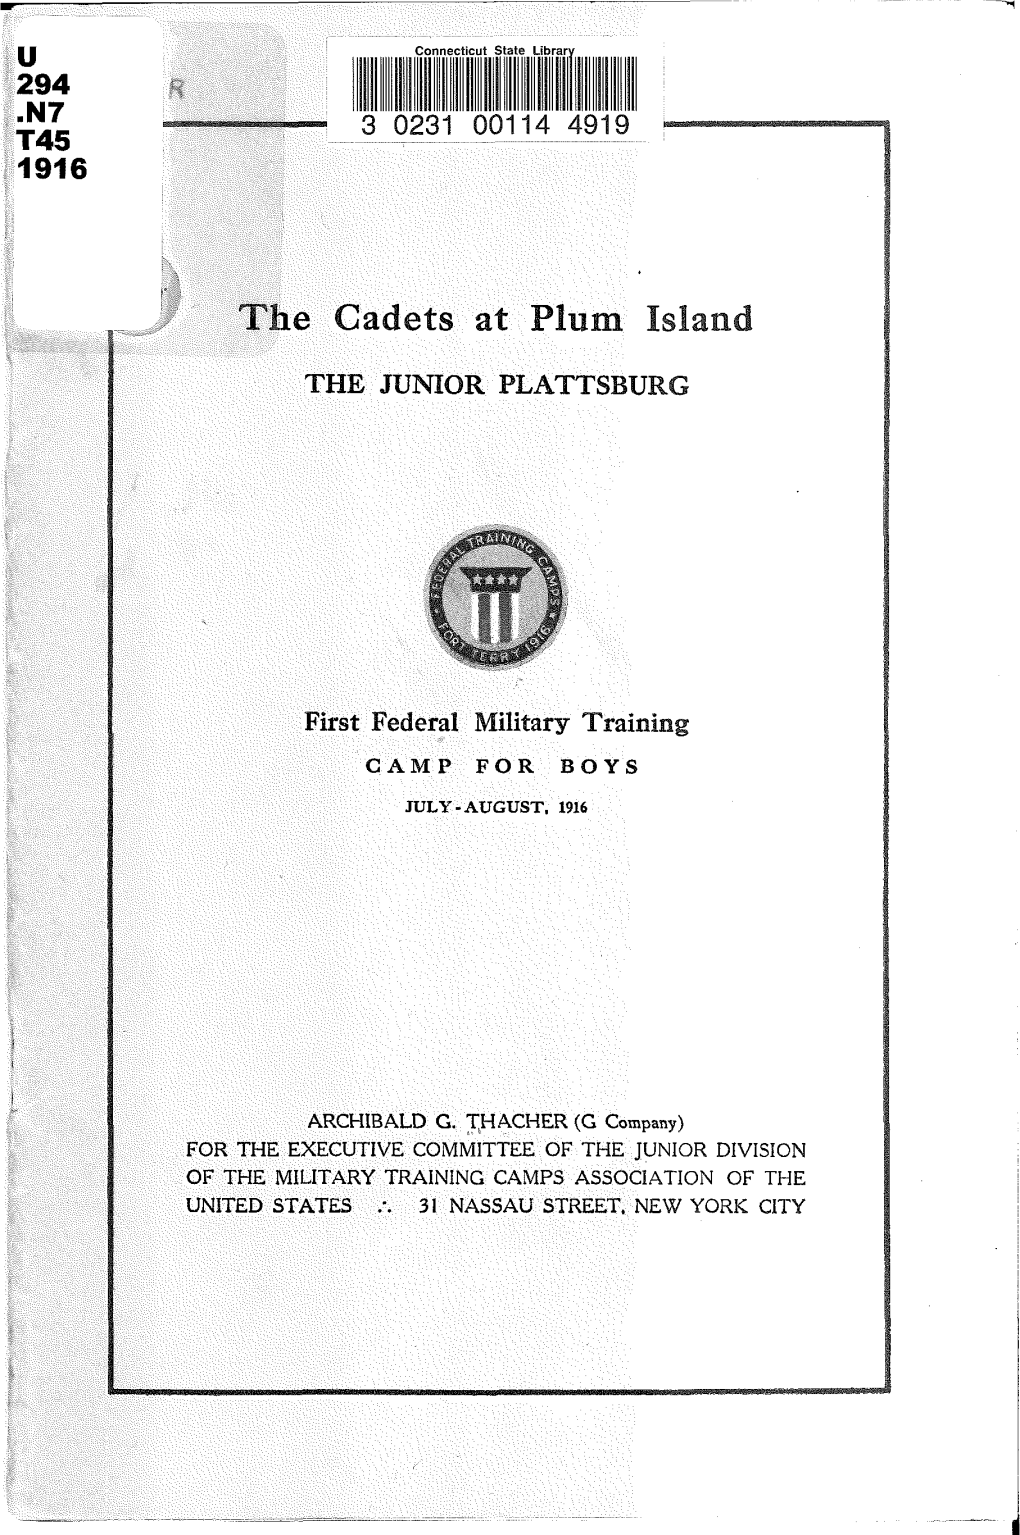 The Cadets at Plum Island